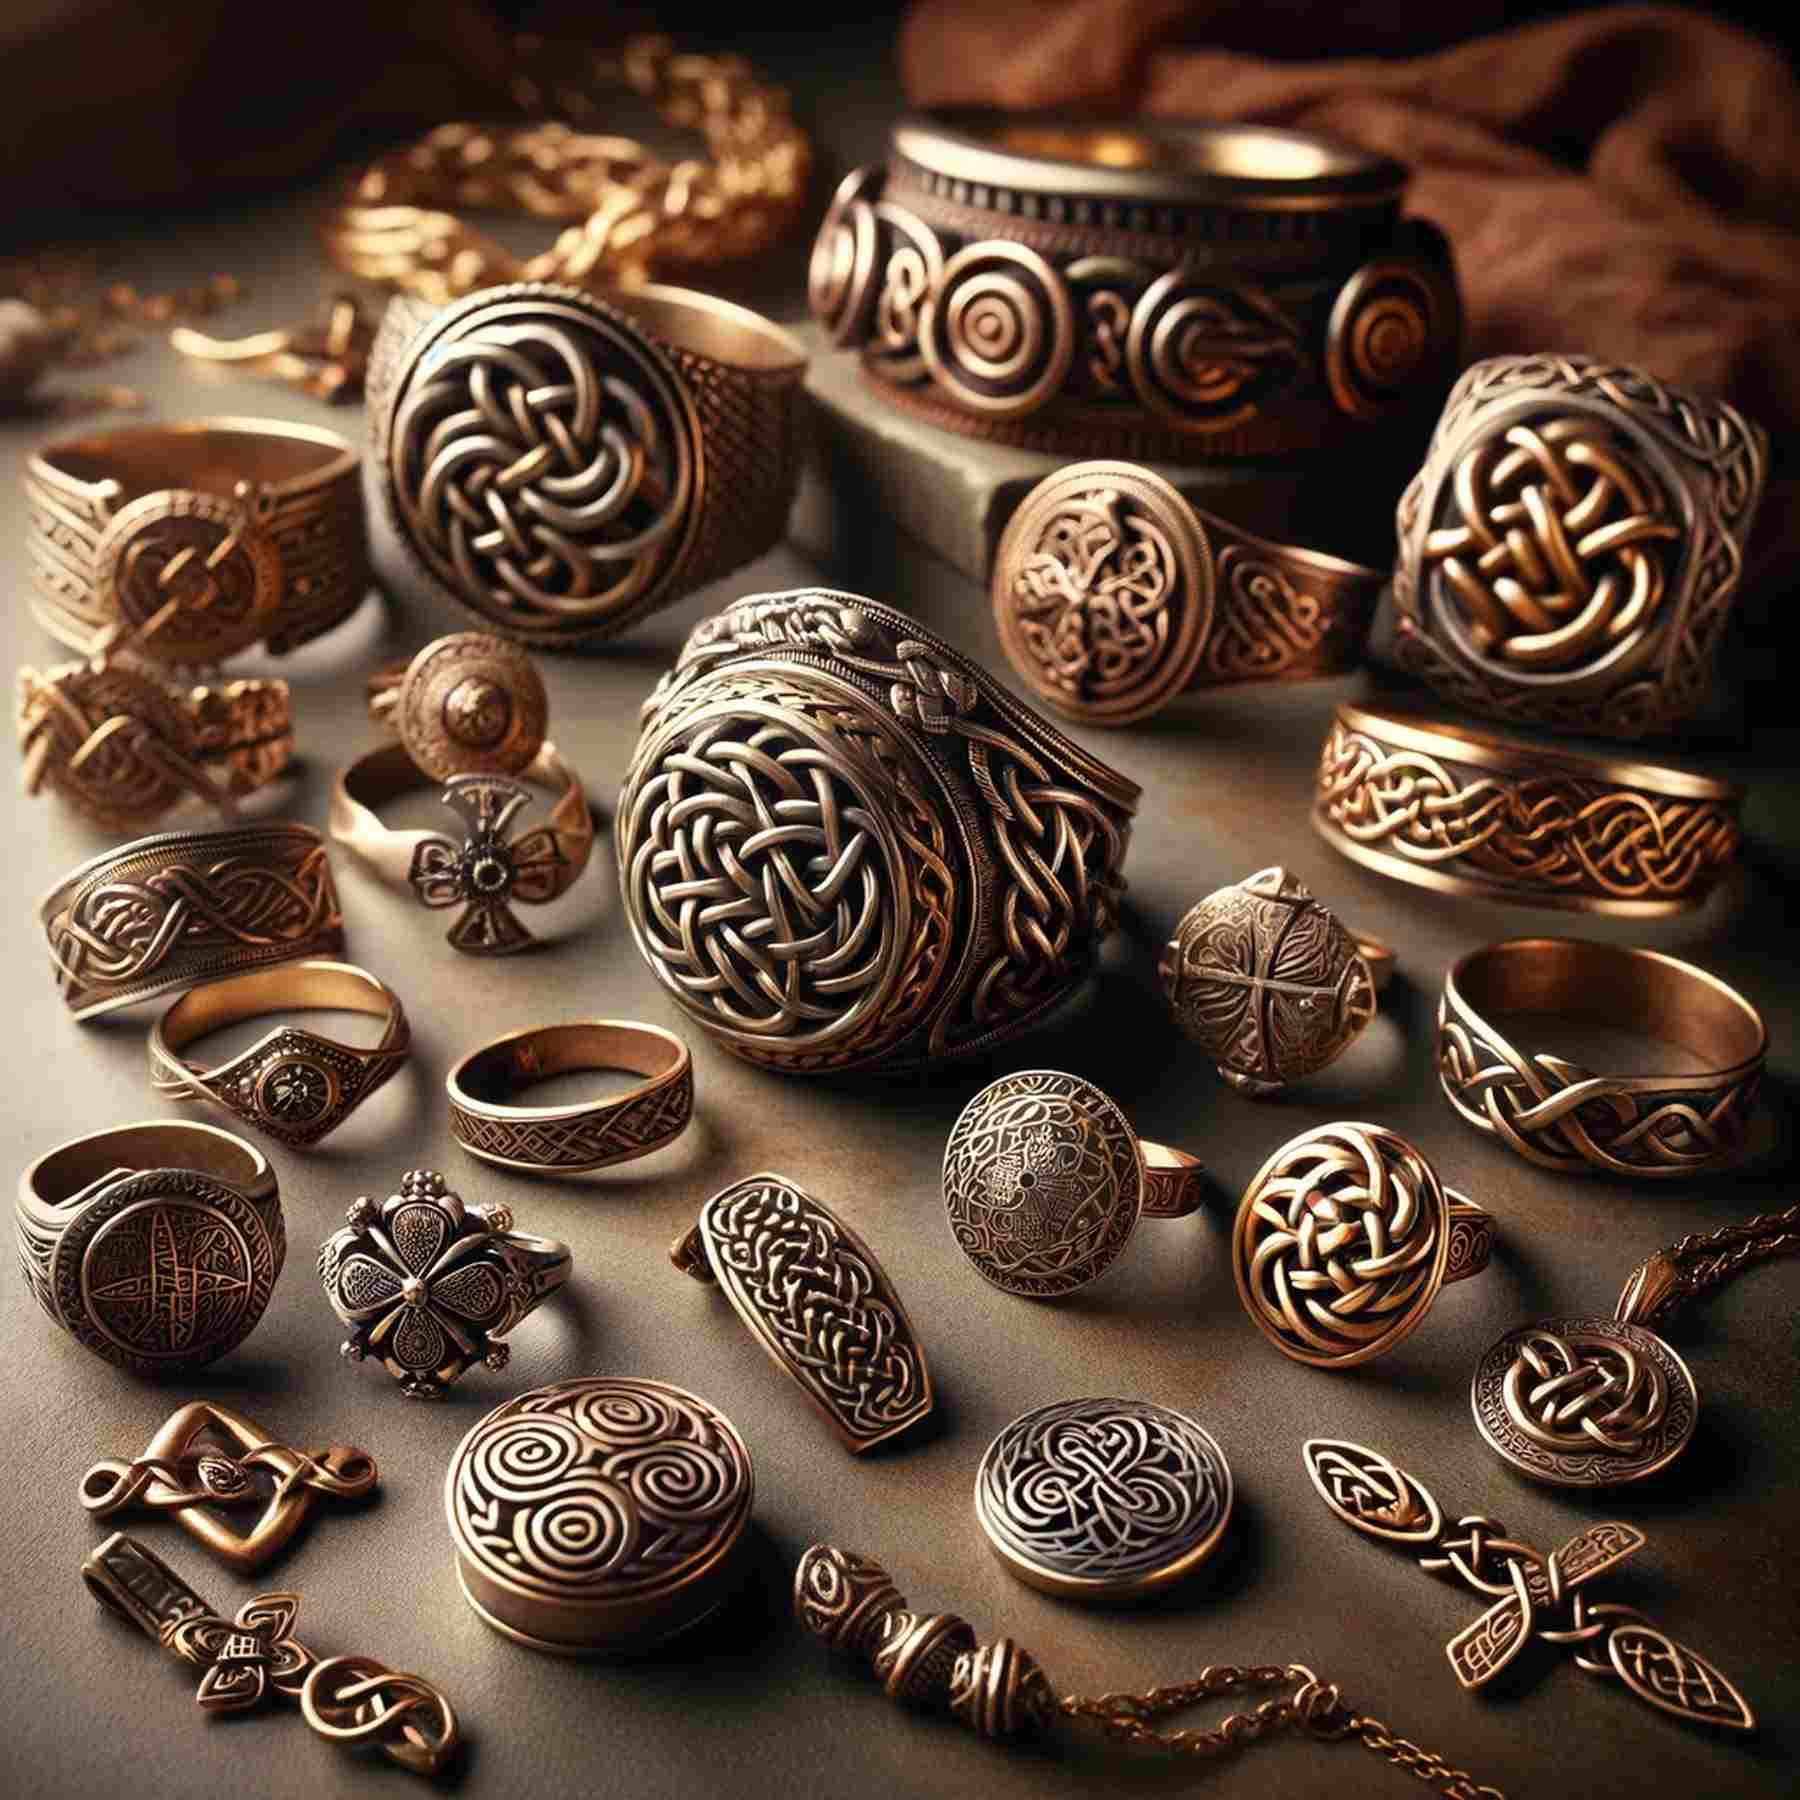 Celtic Jewelry The Symbolism and Meaning